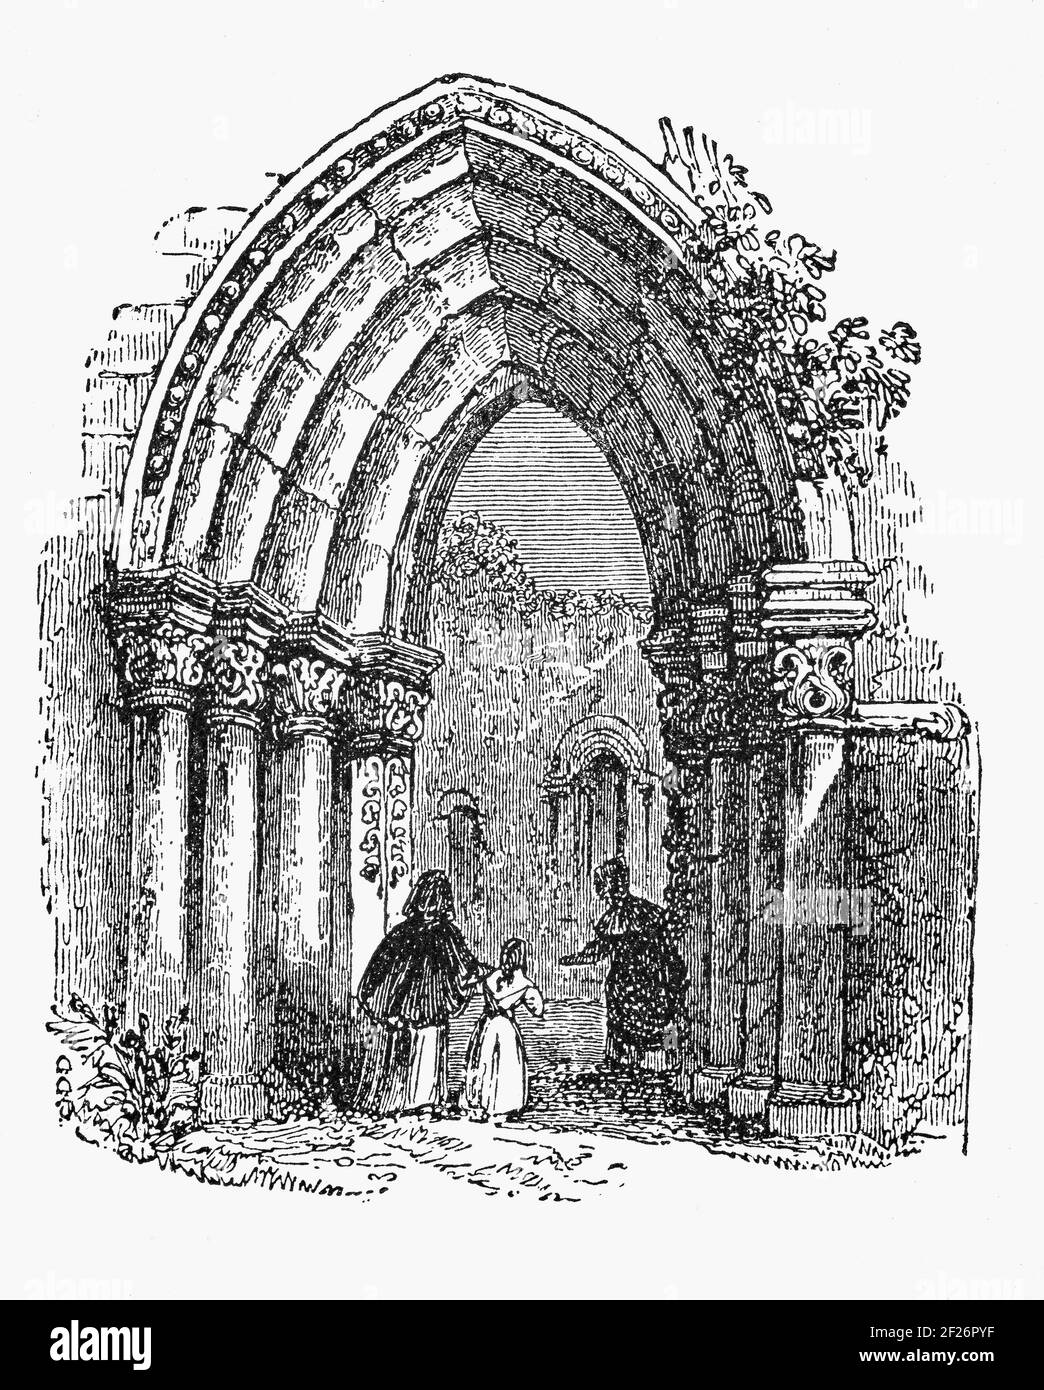 A 19th Century illustration of the Romanesque archway at Cong Abbey, also known as the Royal Abbey of Cong, in County Mayo, Ireland. The former Augustinian abbey, was one of the earliest Augustinian settlements and mostly dates to the 13th century. Stock Photo